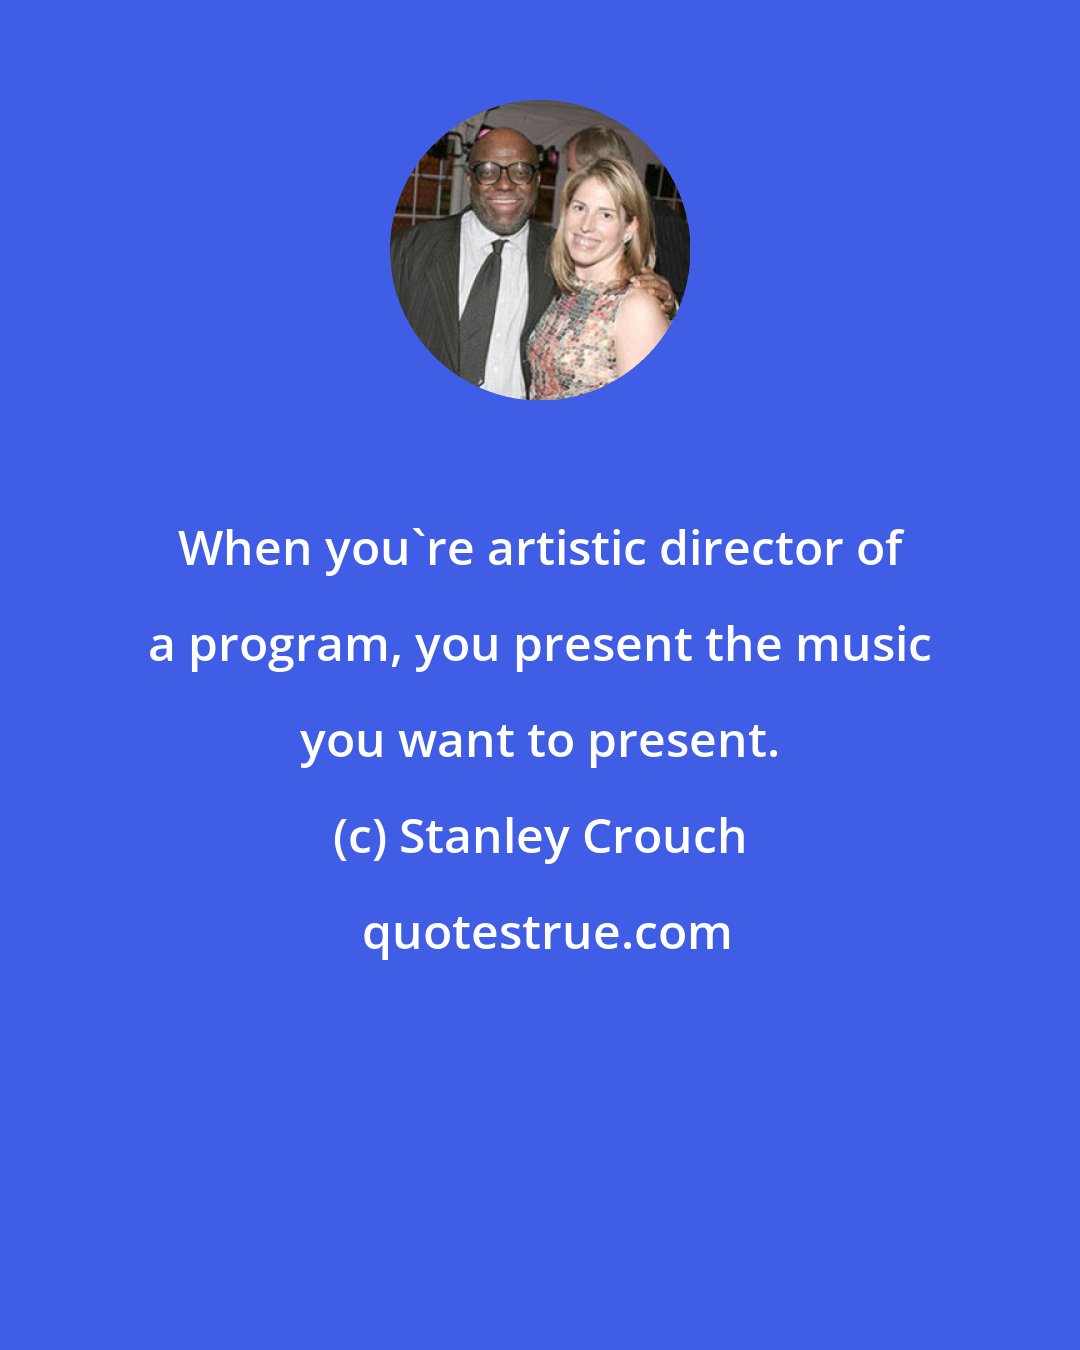 Stanley Crouch: When you're artistic director of a program, you present the music you want to present.